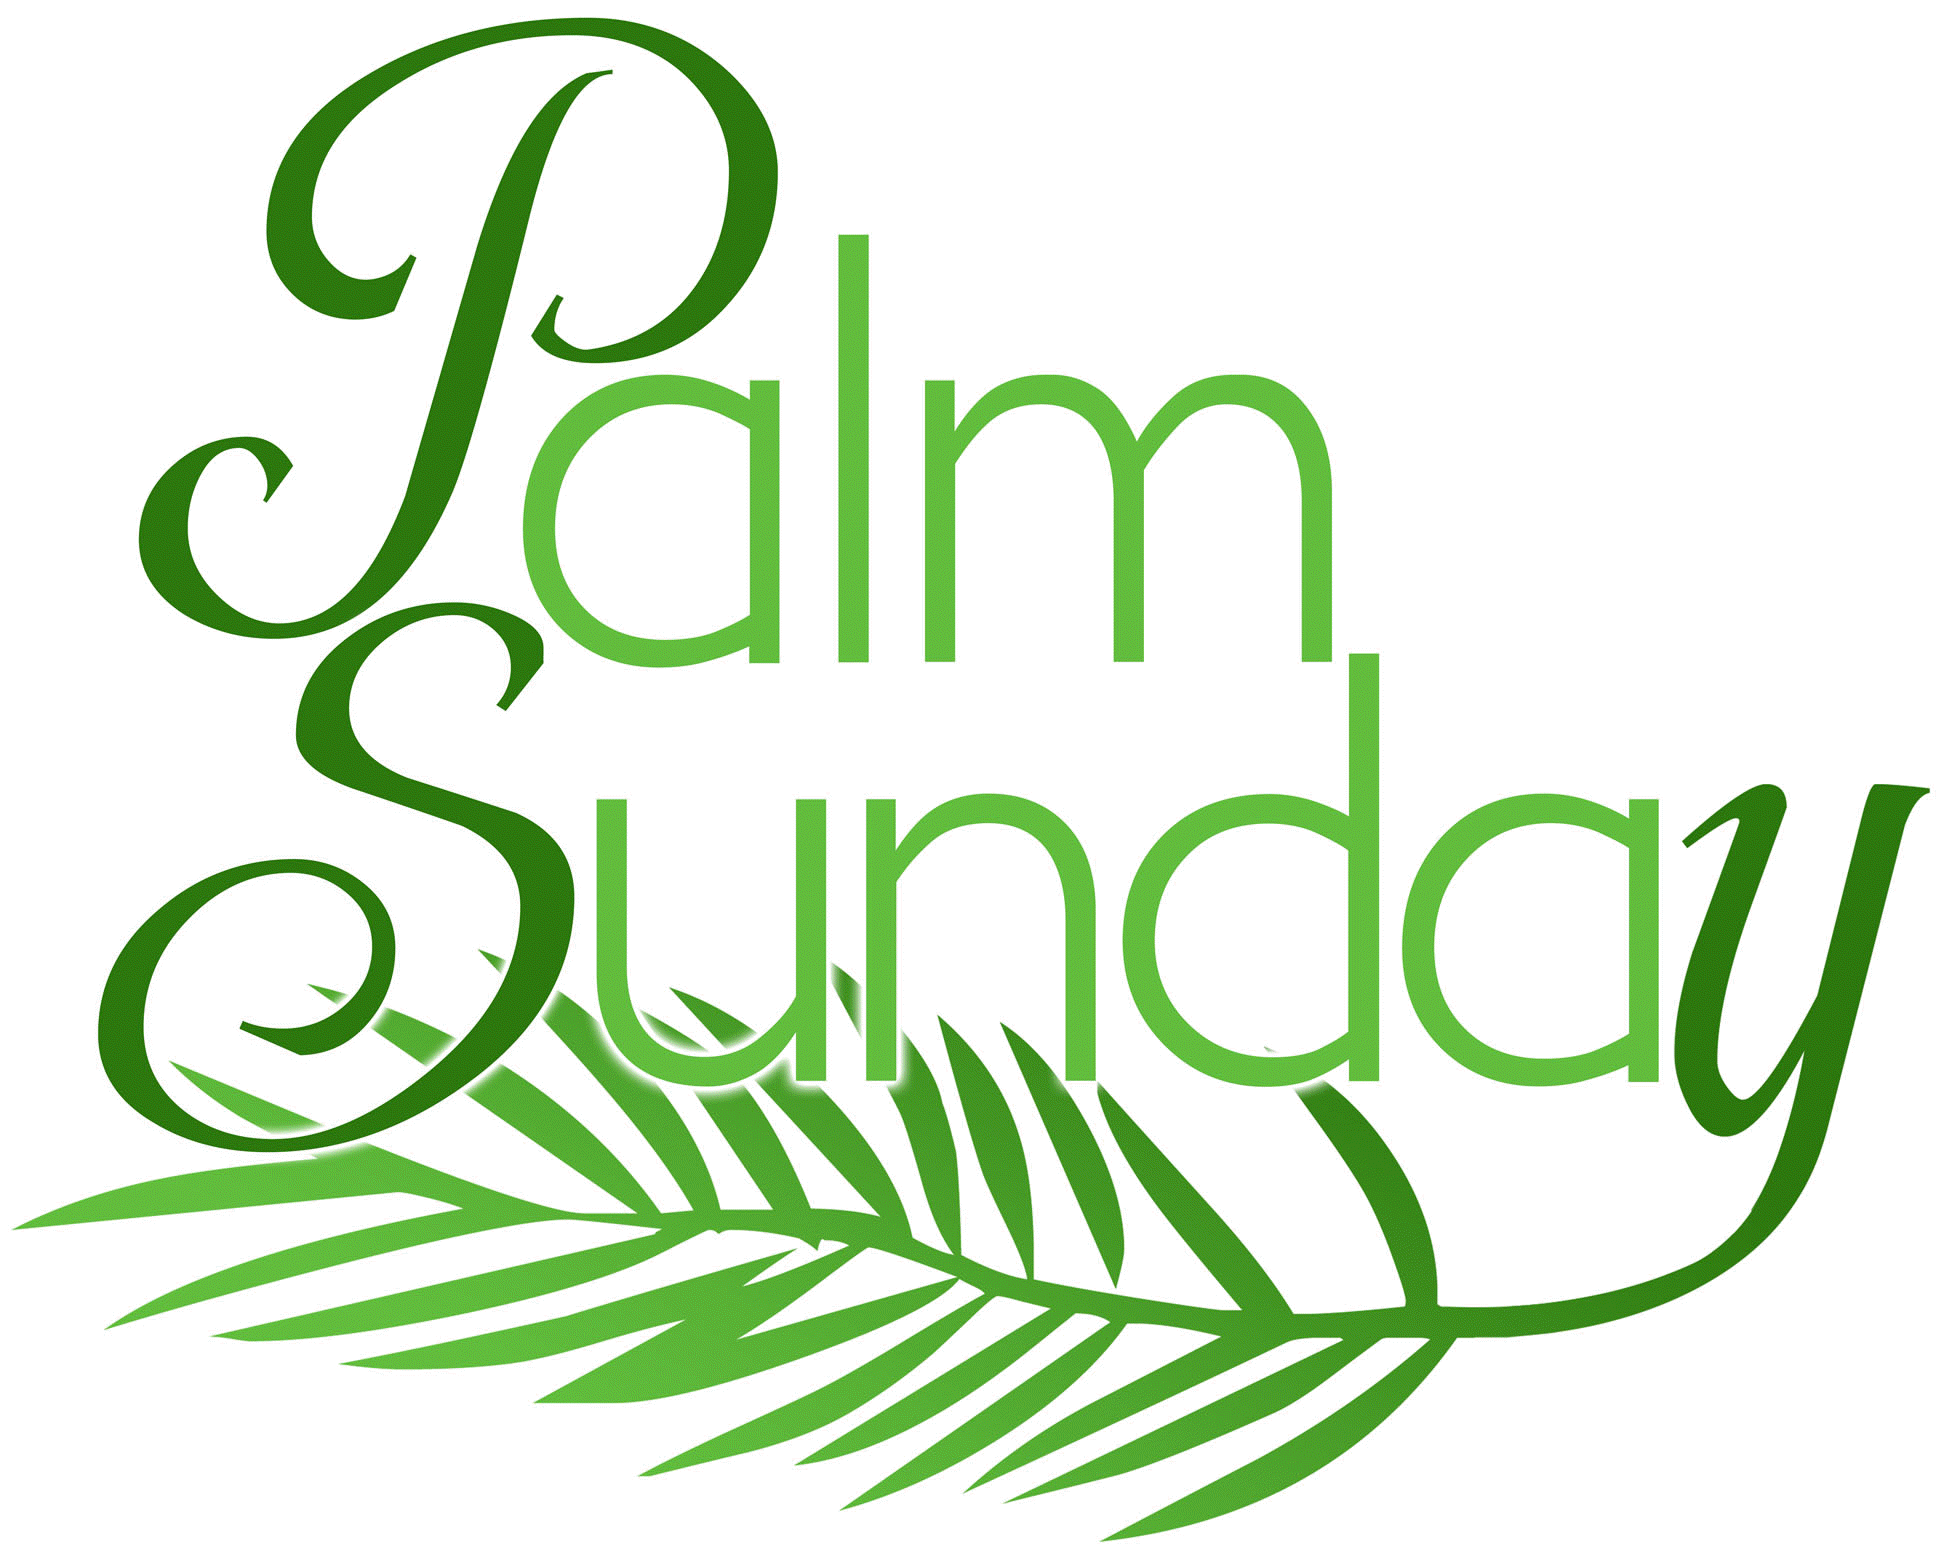 free christian clipart for easter sunday - photo #3